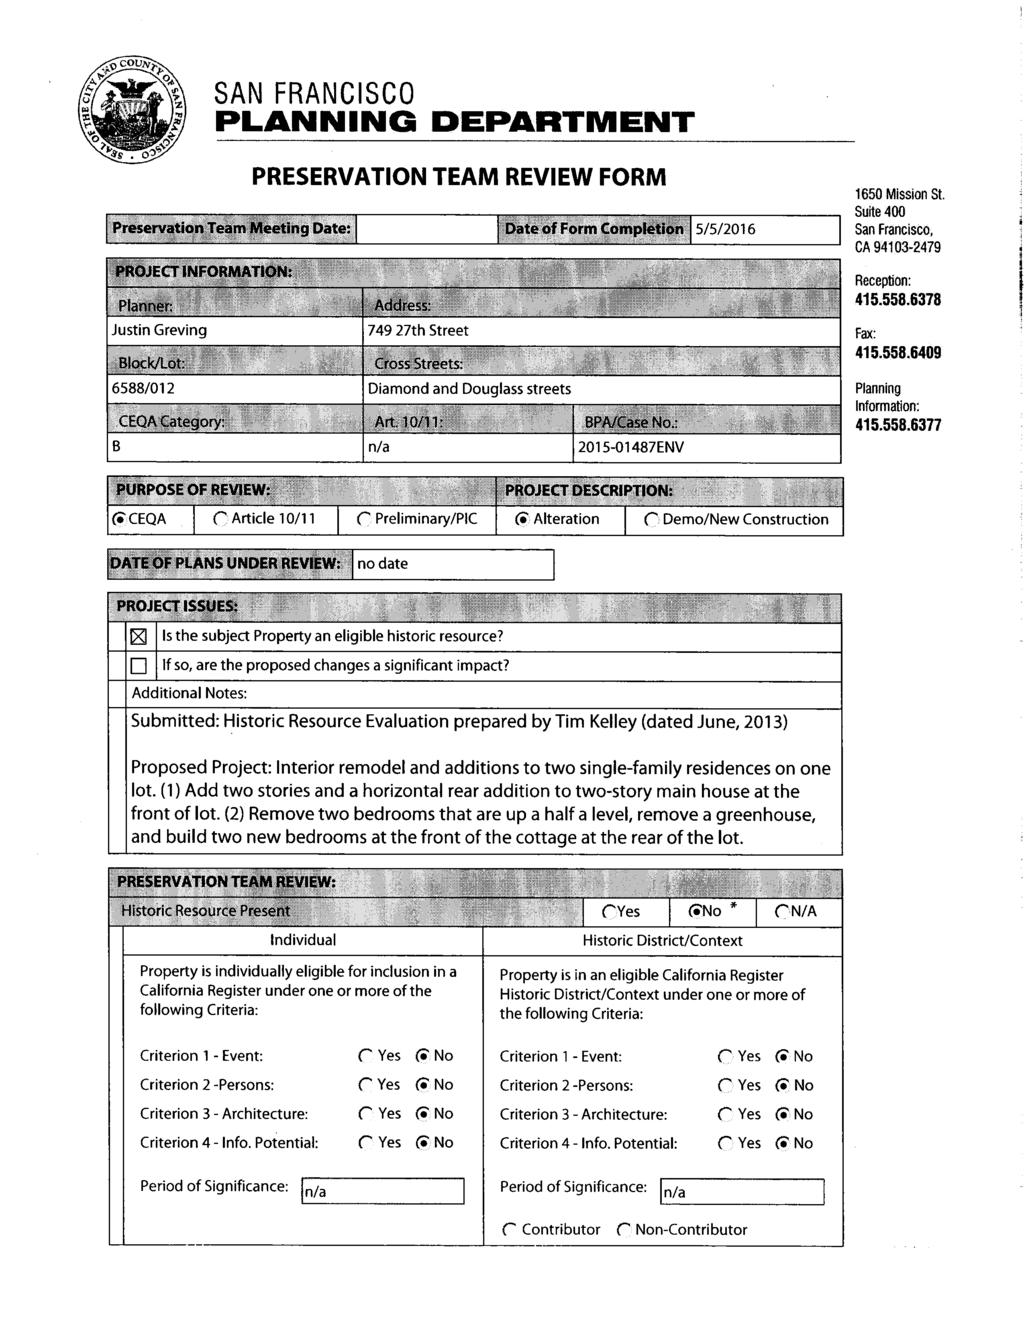 ~~A~o counr~o~ ~ z w j x r a O ~b~s 074~ SAN FRANCISCO PLANNING DEPARTMENT PRESERVATION TEAM REVIEW FORM Preservation Team Meeting Date: Date of Form Completion 5/5/2016 PROJECT INFORMATION: Planner: